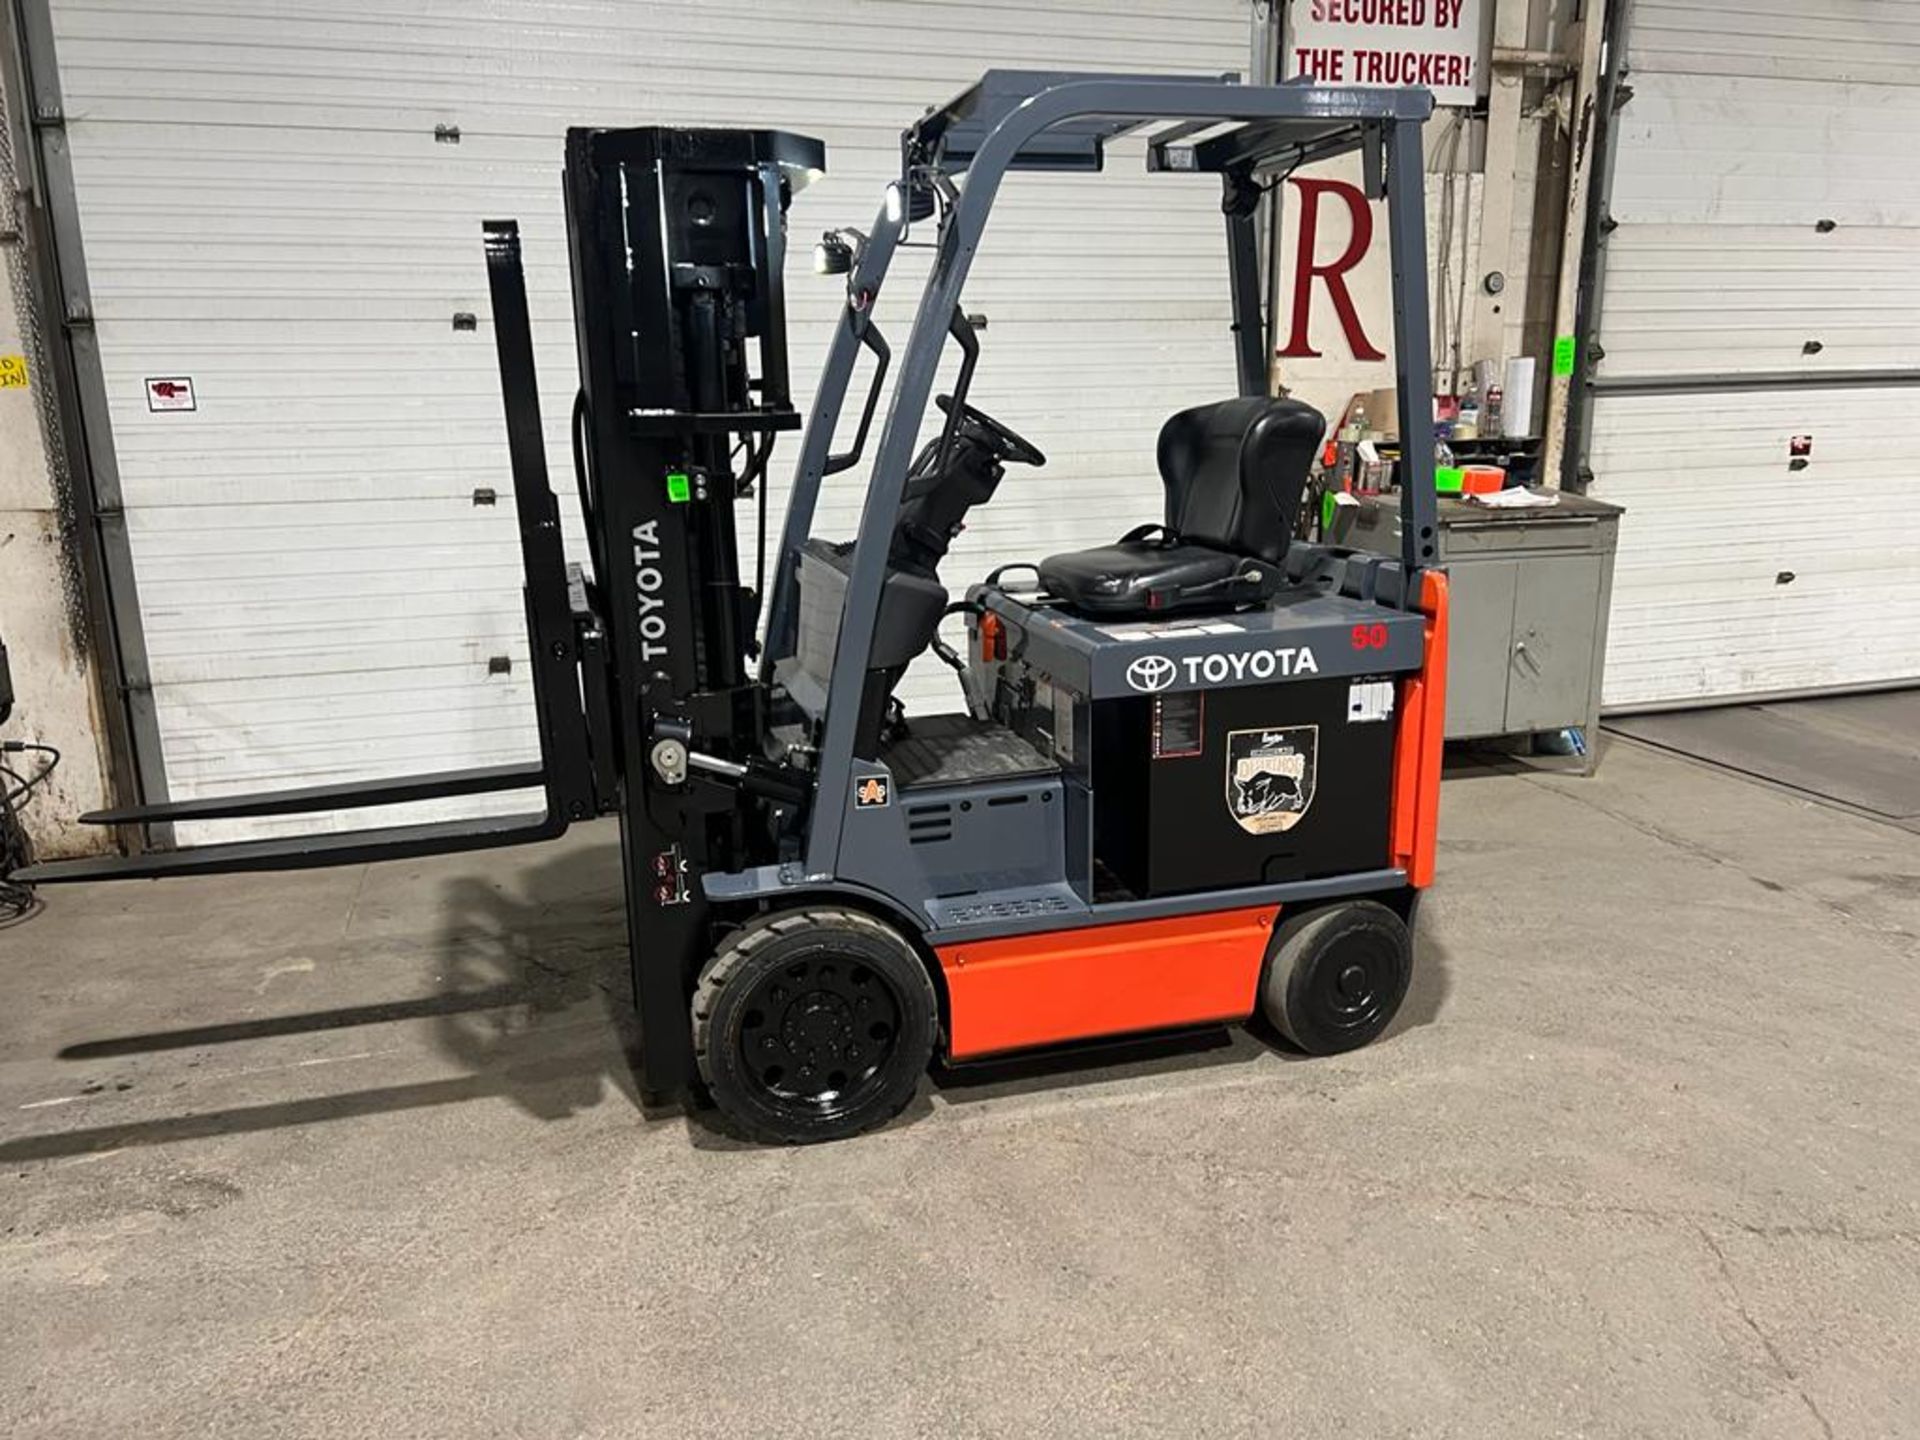 Toyota 5,000lbs Capacity Electric Forklift 4-STAGE MAST with Sideshift & 36V Battery - FREE CUSTOMS